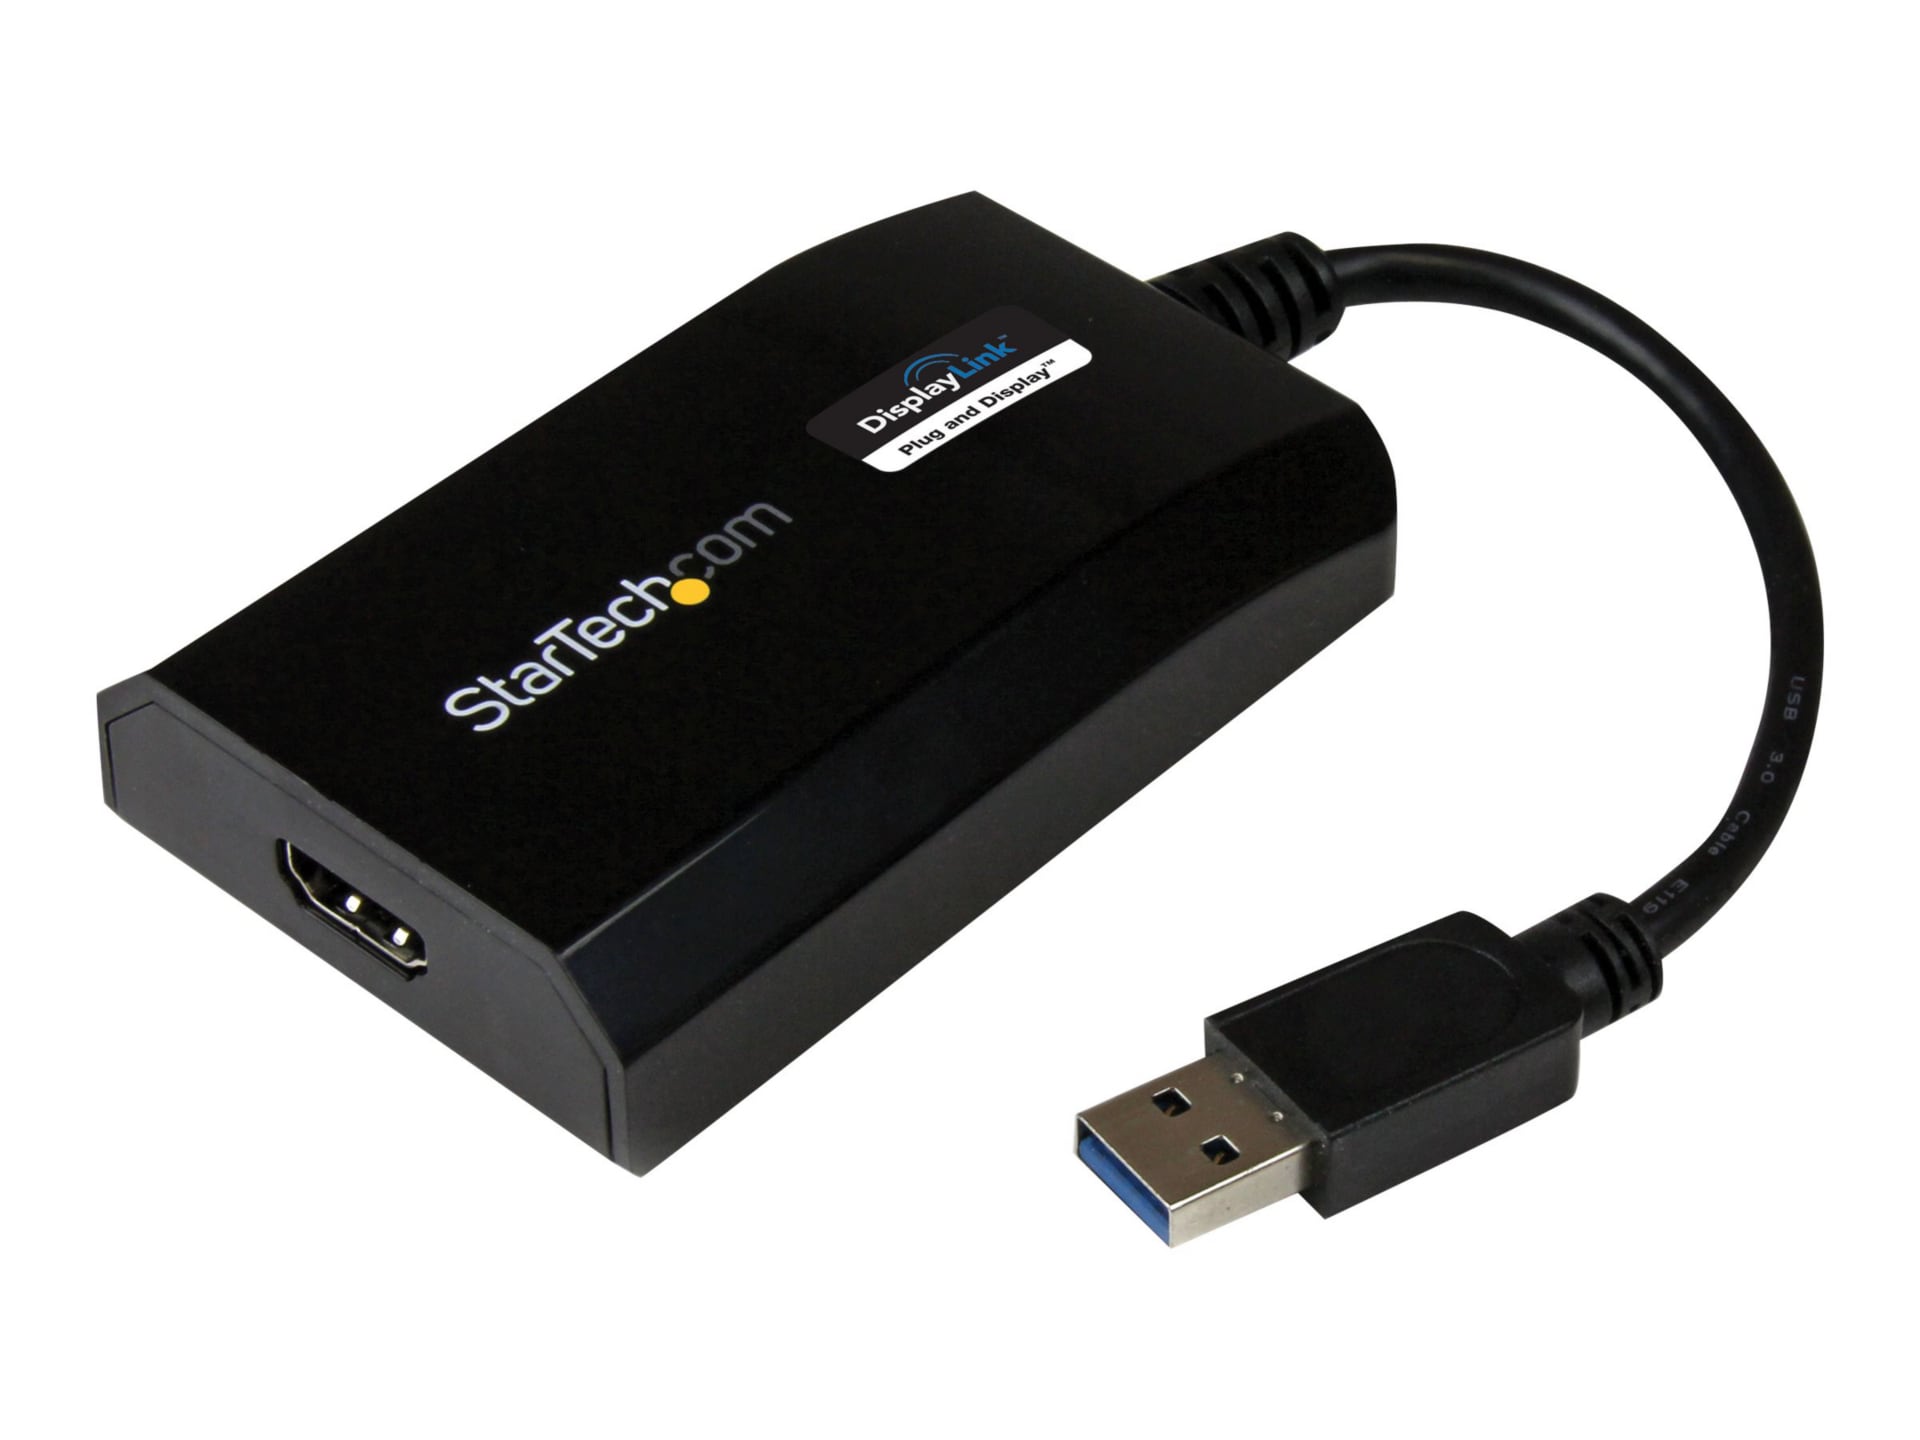 StarTech.com USB 3.0 to HDMI Adapter - DisplayLink Certified - External  Graphics Card for Mac/PC